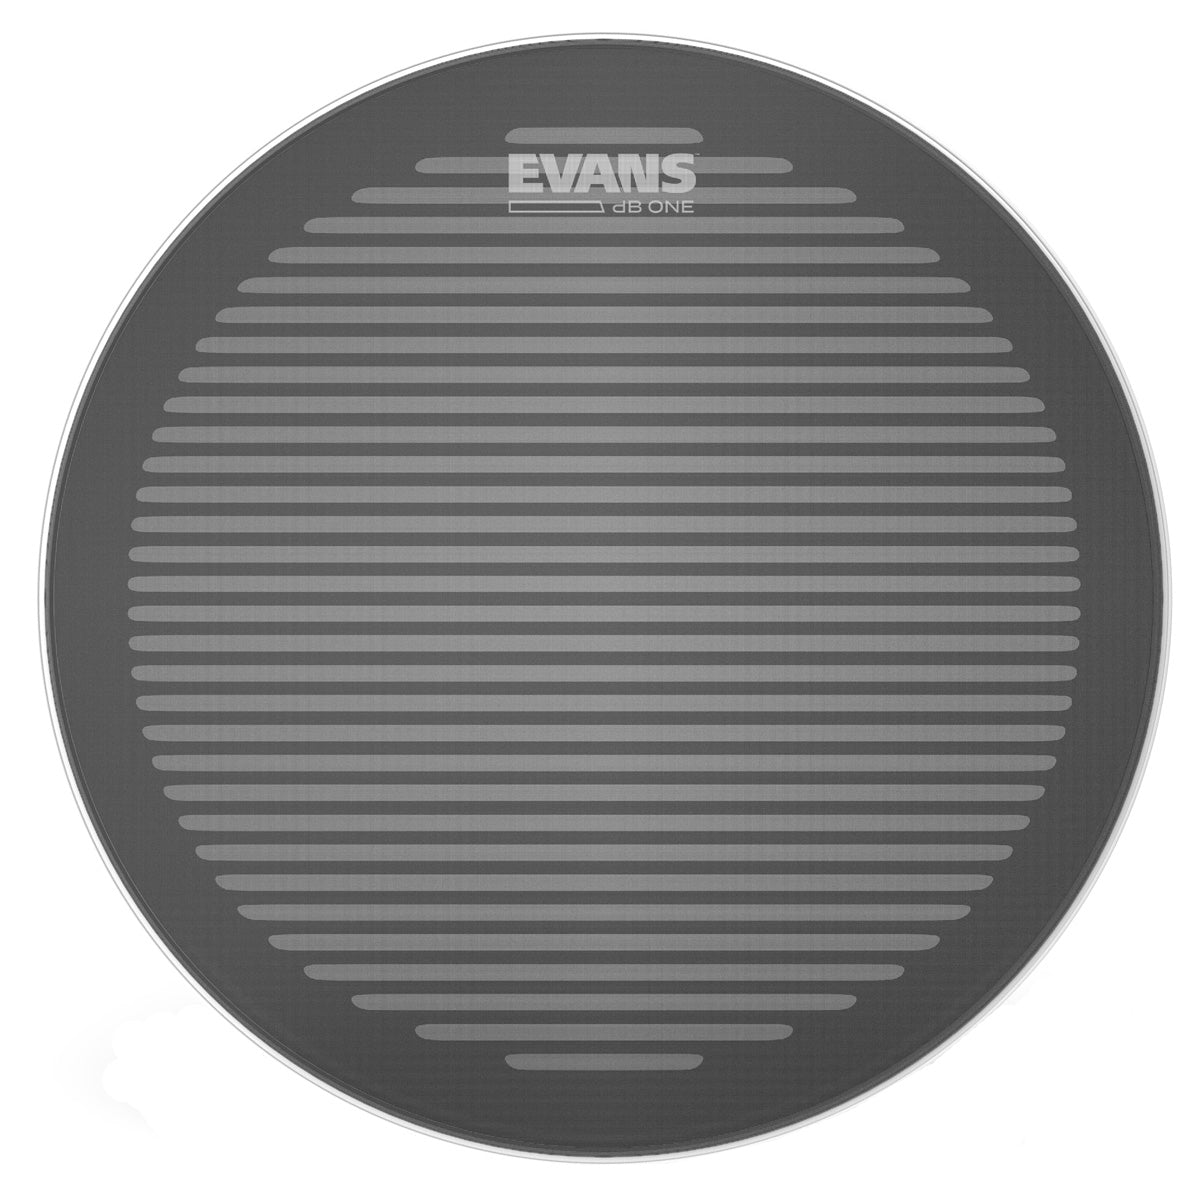 Evans dB One Reduced Volume Snare Drum Heads